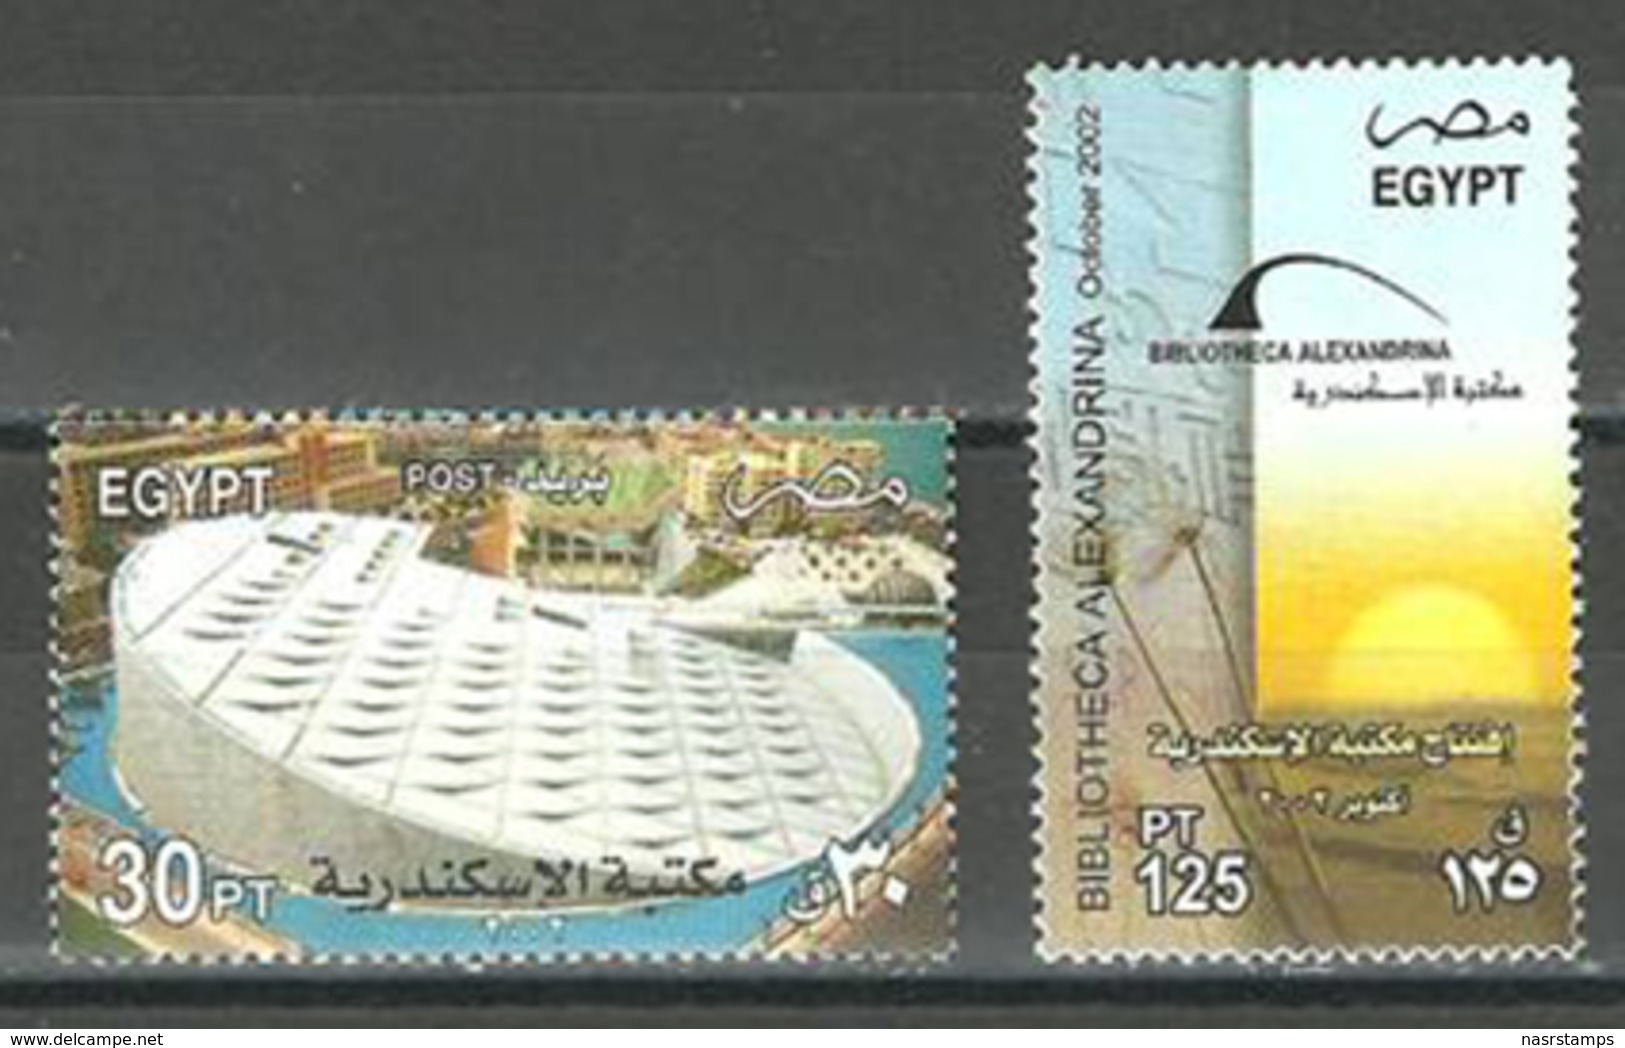 Egypt - 2002 - ( Opening Of Alexandria Library - Ancient Alexandria Library ) - MNH** - Egyptology